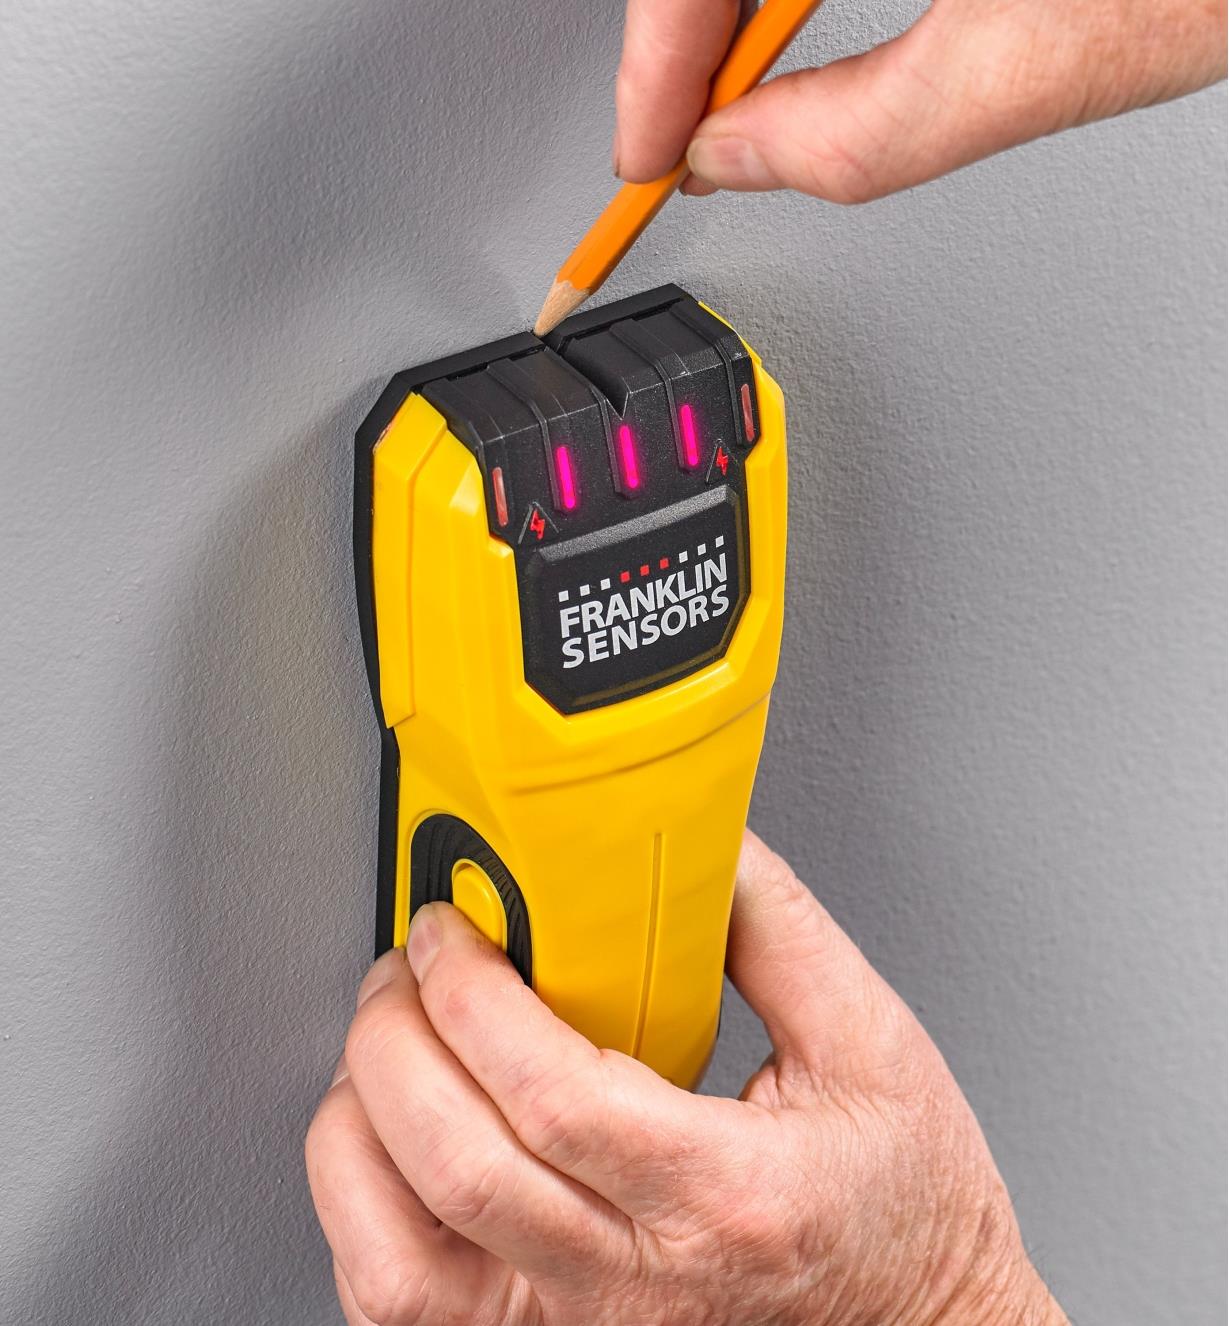 The Franklin M50 stud detector’s pencil notch is used in marking a stud’s location